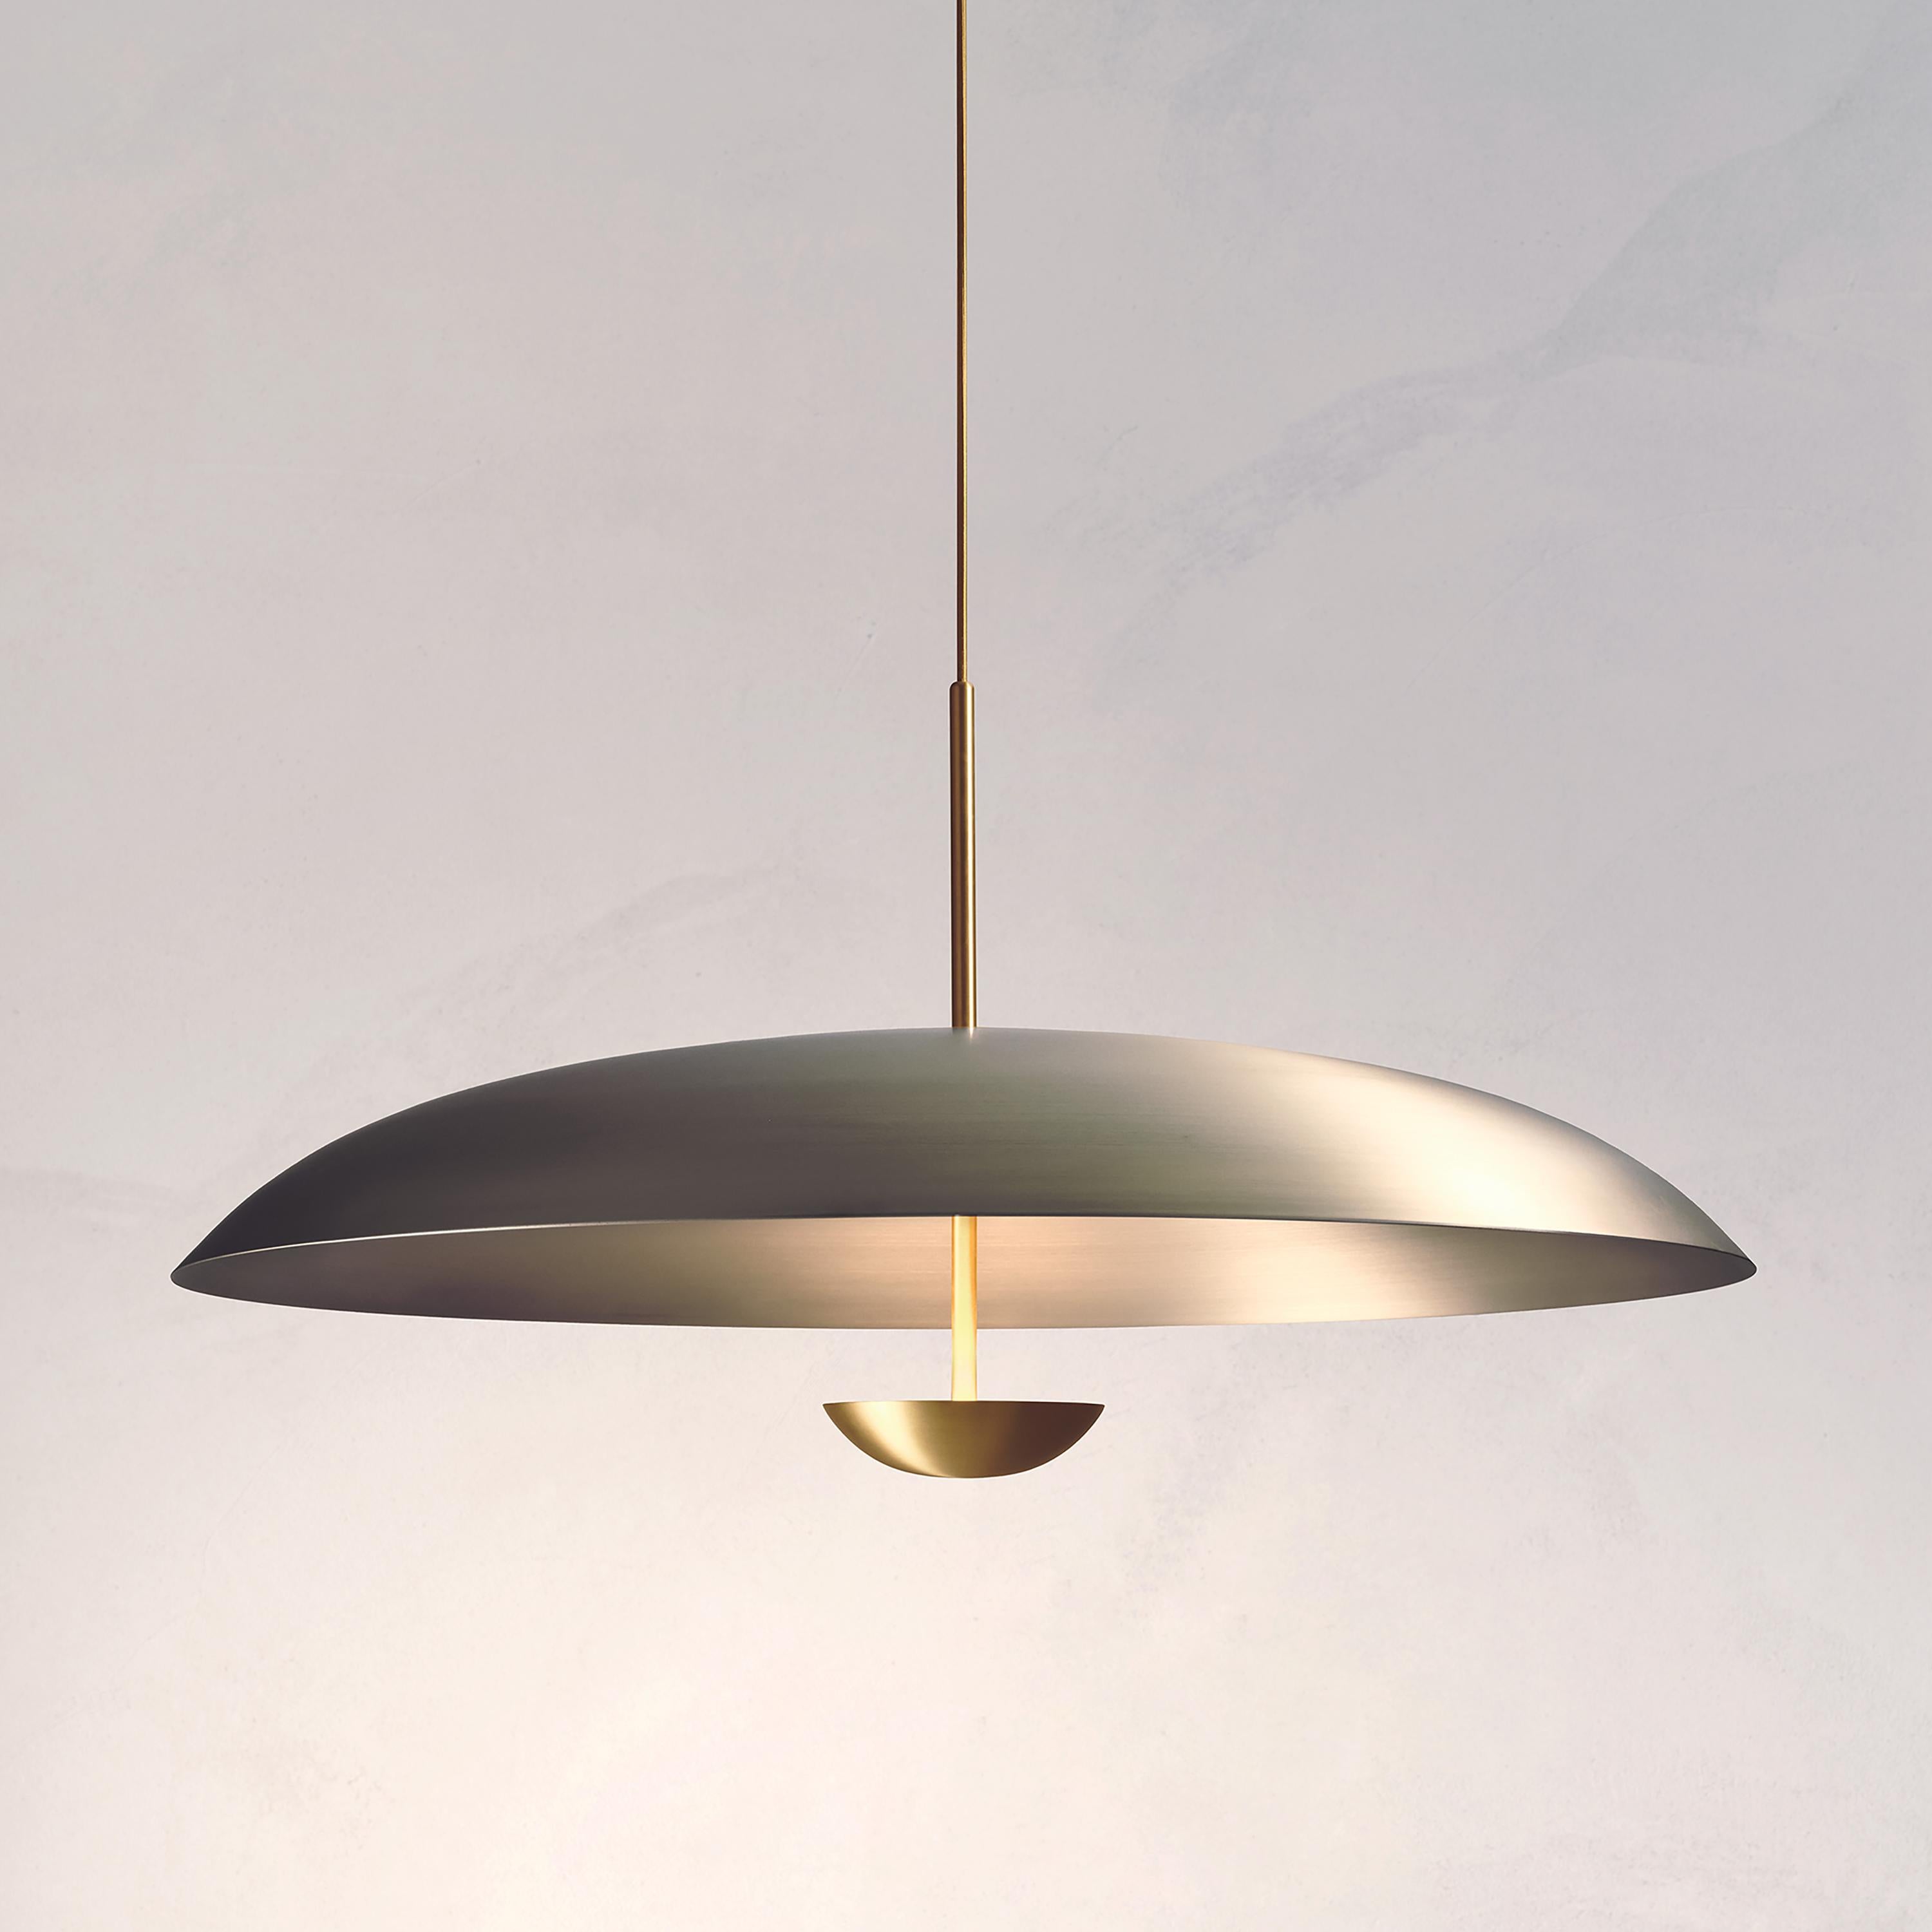 'Seleno Sol Pendant 70' Handmade Brushed Steel and Brass Ceiling Lamp In New Condition For Sale In London, GB